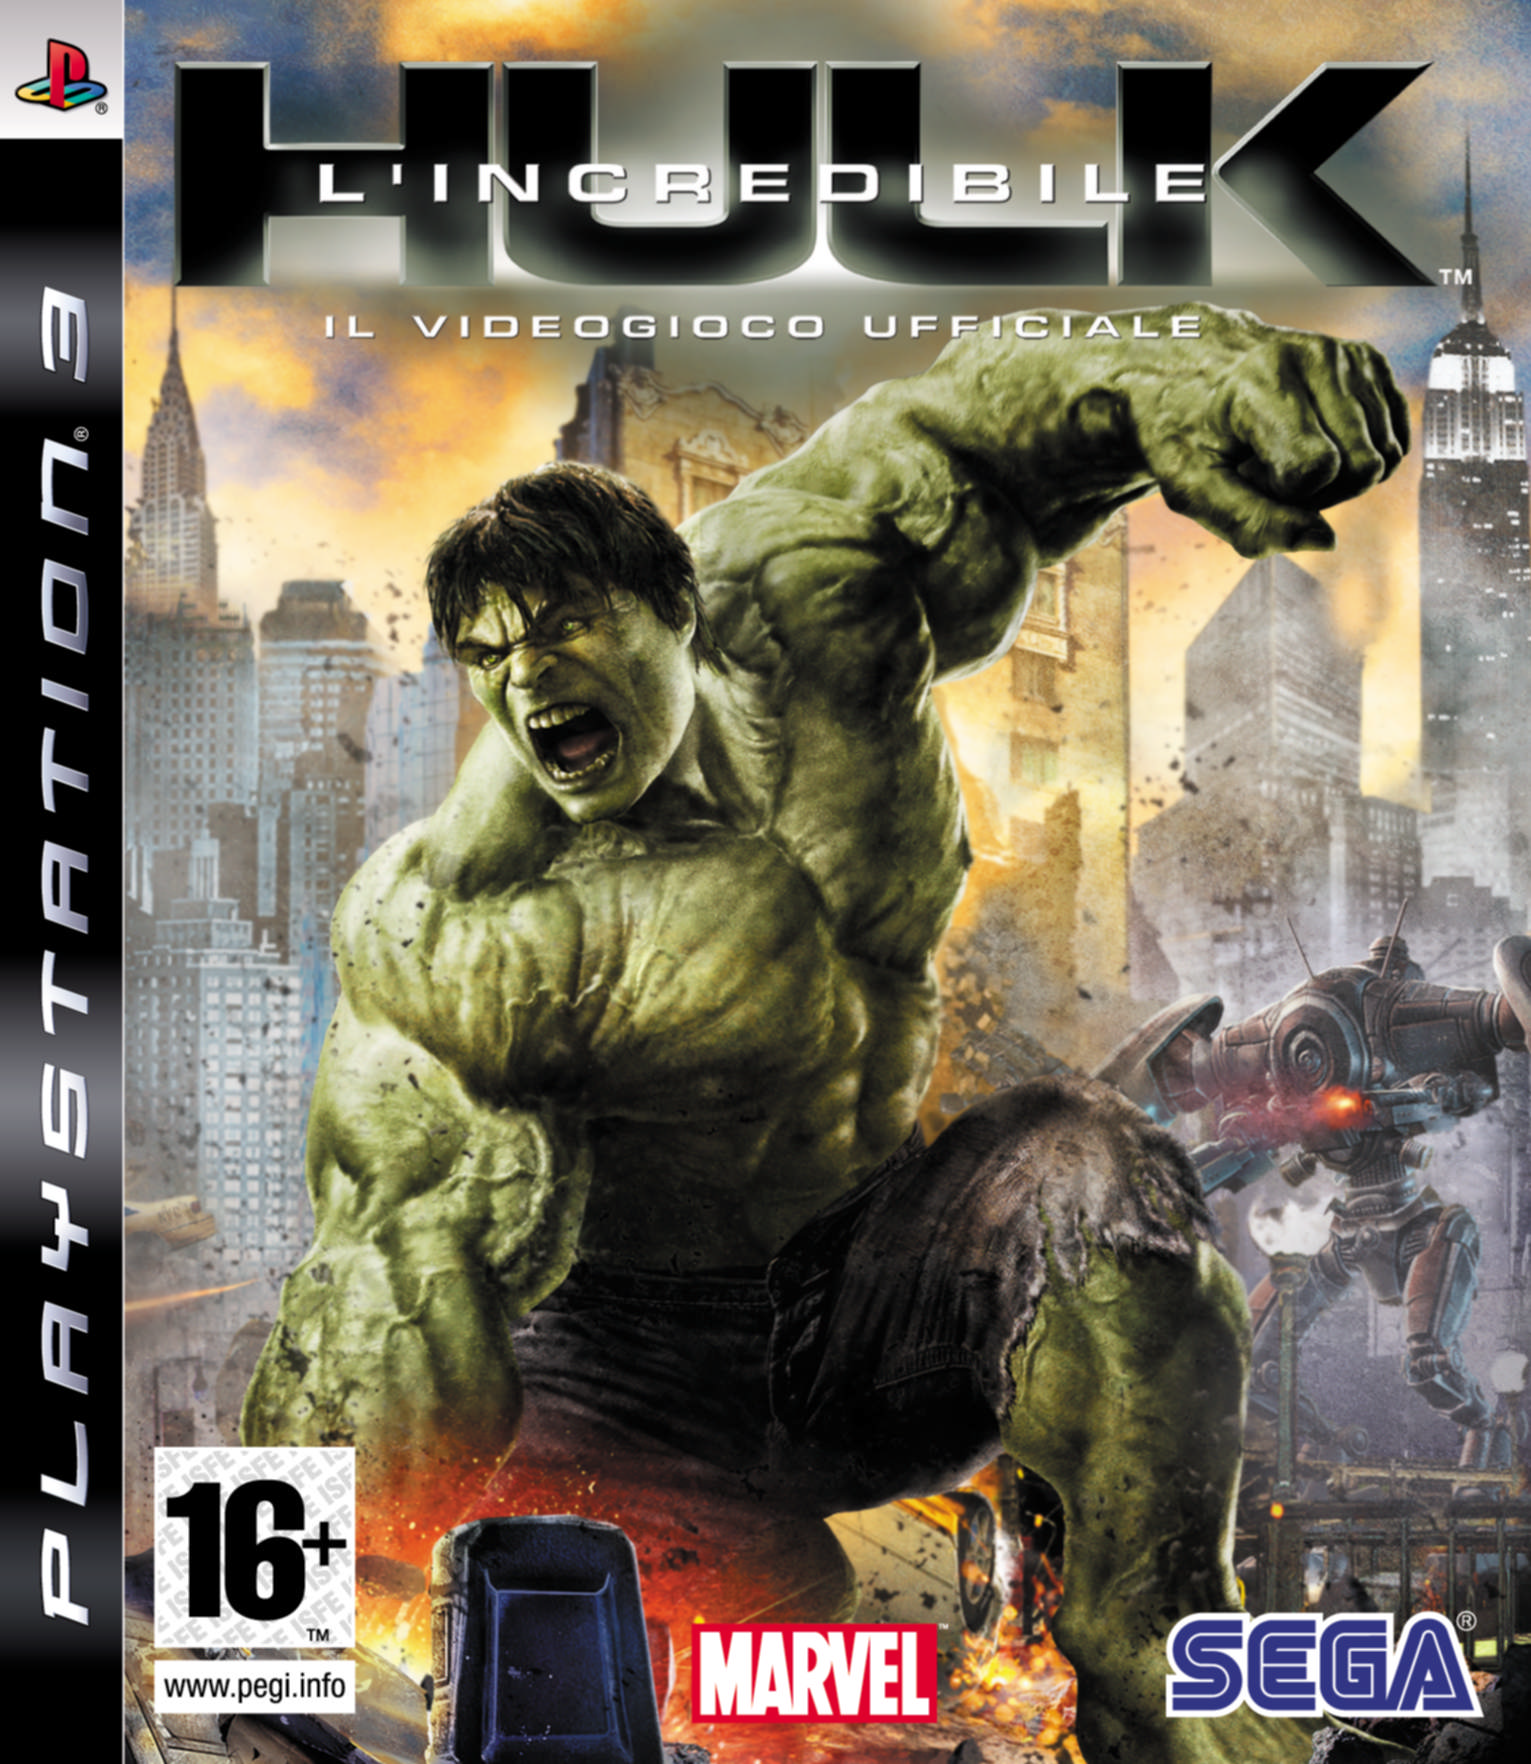 image-hulk-ps3-it-cover-jpg-marvel-cinematic-universe-wiki-fandom-powered-by-wikia